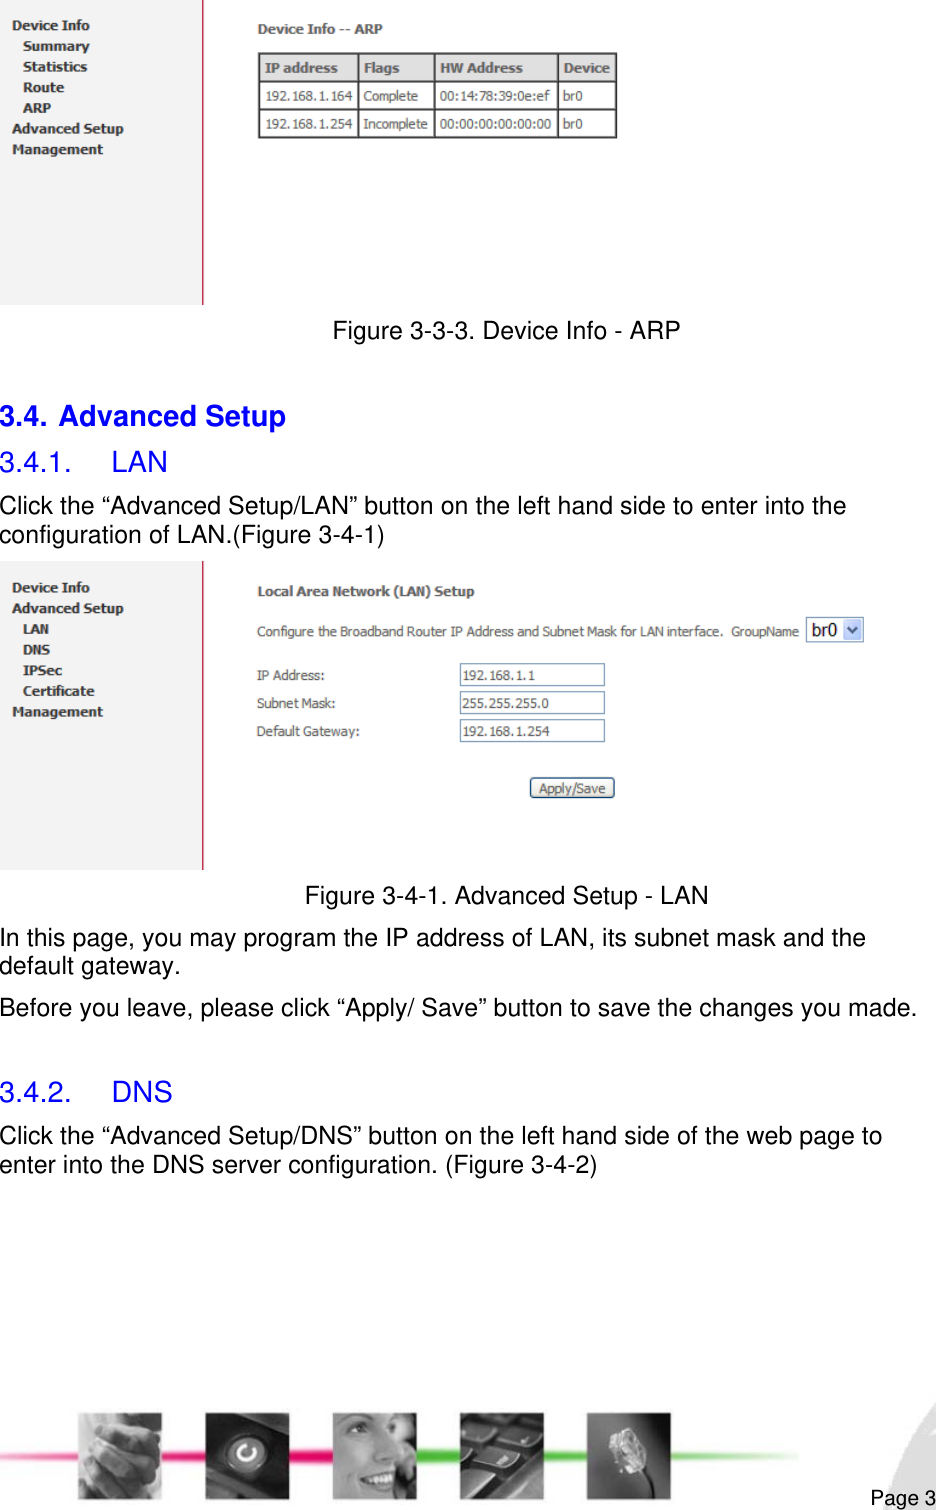                                                                                                                                                                                                        Figure 3-3-3. Device Info - ARP  3.4. Advanced Setup 3.4.1. LAN Click the “Advanced Setup/LAN” button on the left hand side to enter into the configuration of LAN.(Figure 3-4-1)  Figure 3-4-1. Advanced Setup - LAN In this page, you may program the IP address of LAN, its subnet mask and the default gateway.  Before you leave, please click “Apply/ Save” button to save the changes you made.  3.4.2. DNS Click the “Advanced Setup/DNS” button on the left hand side of the web page to enter into the DNS server configuration. (Figure 3-4-2)  Page 3 